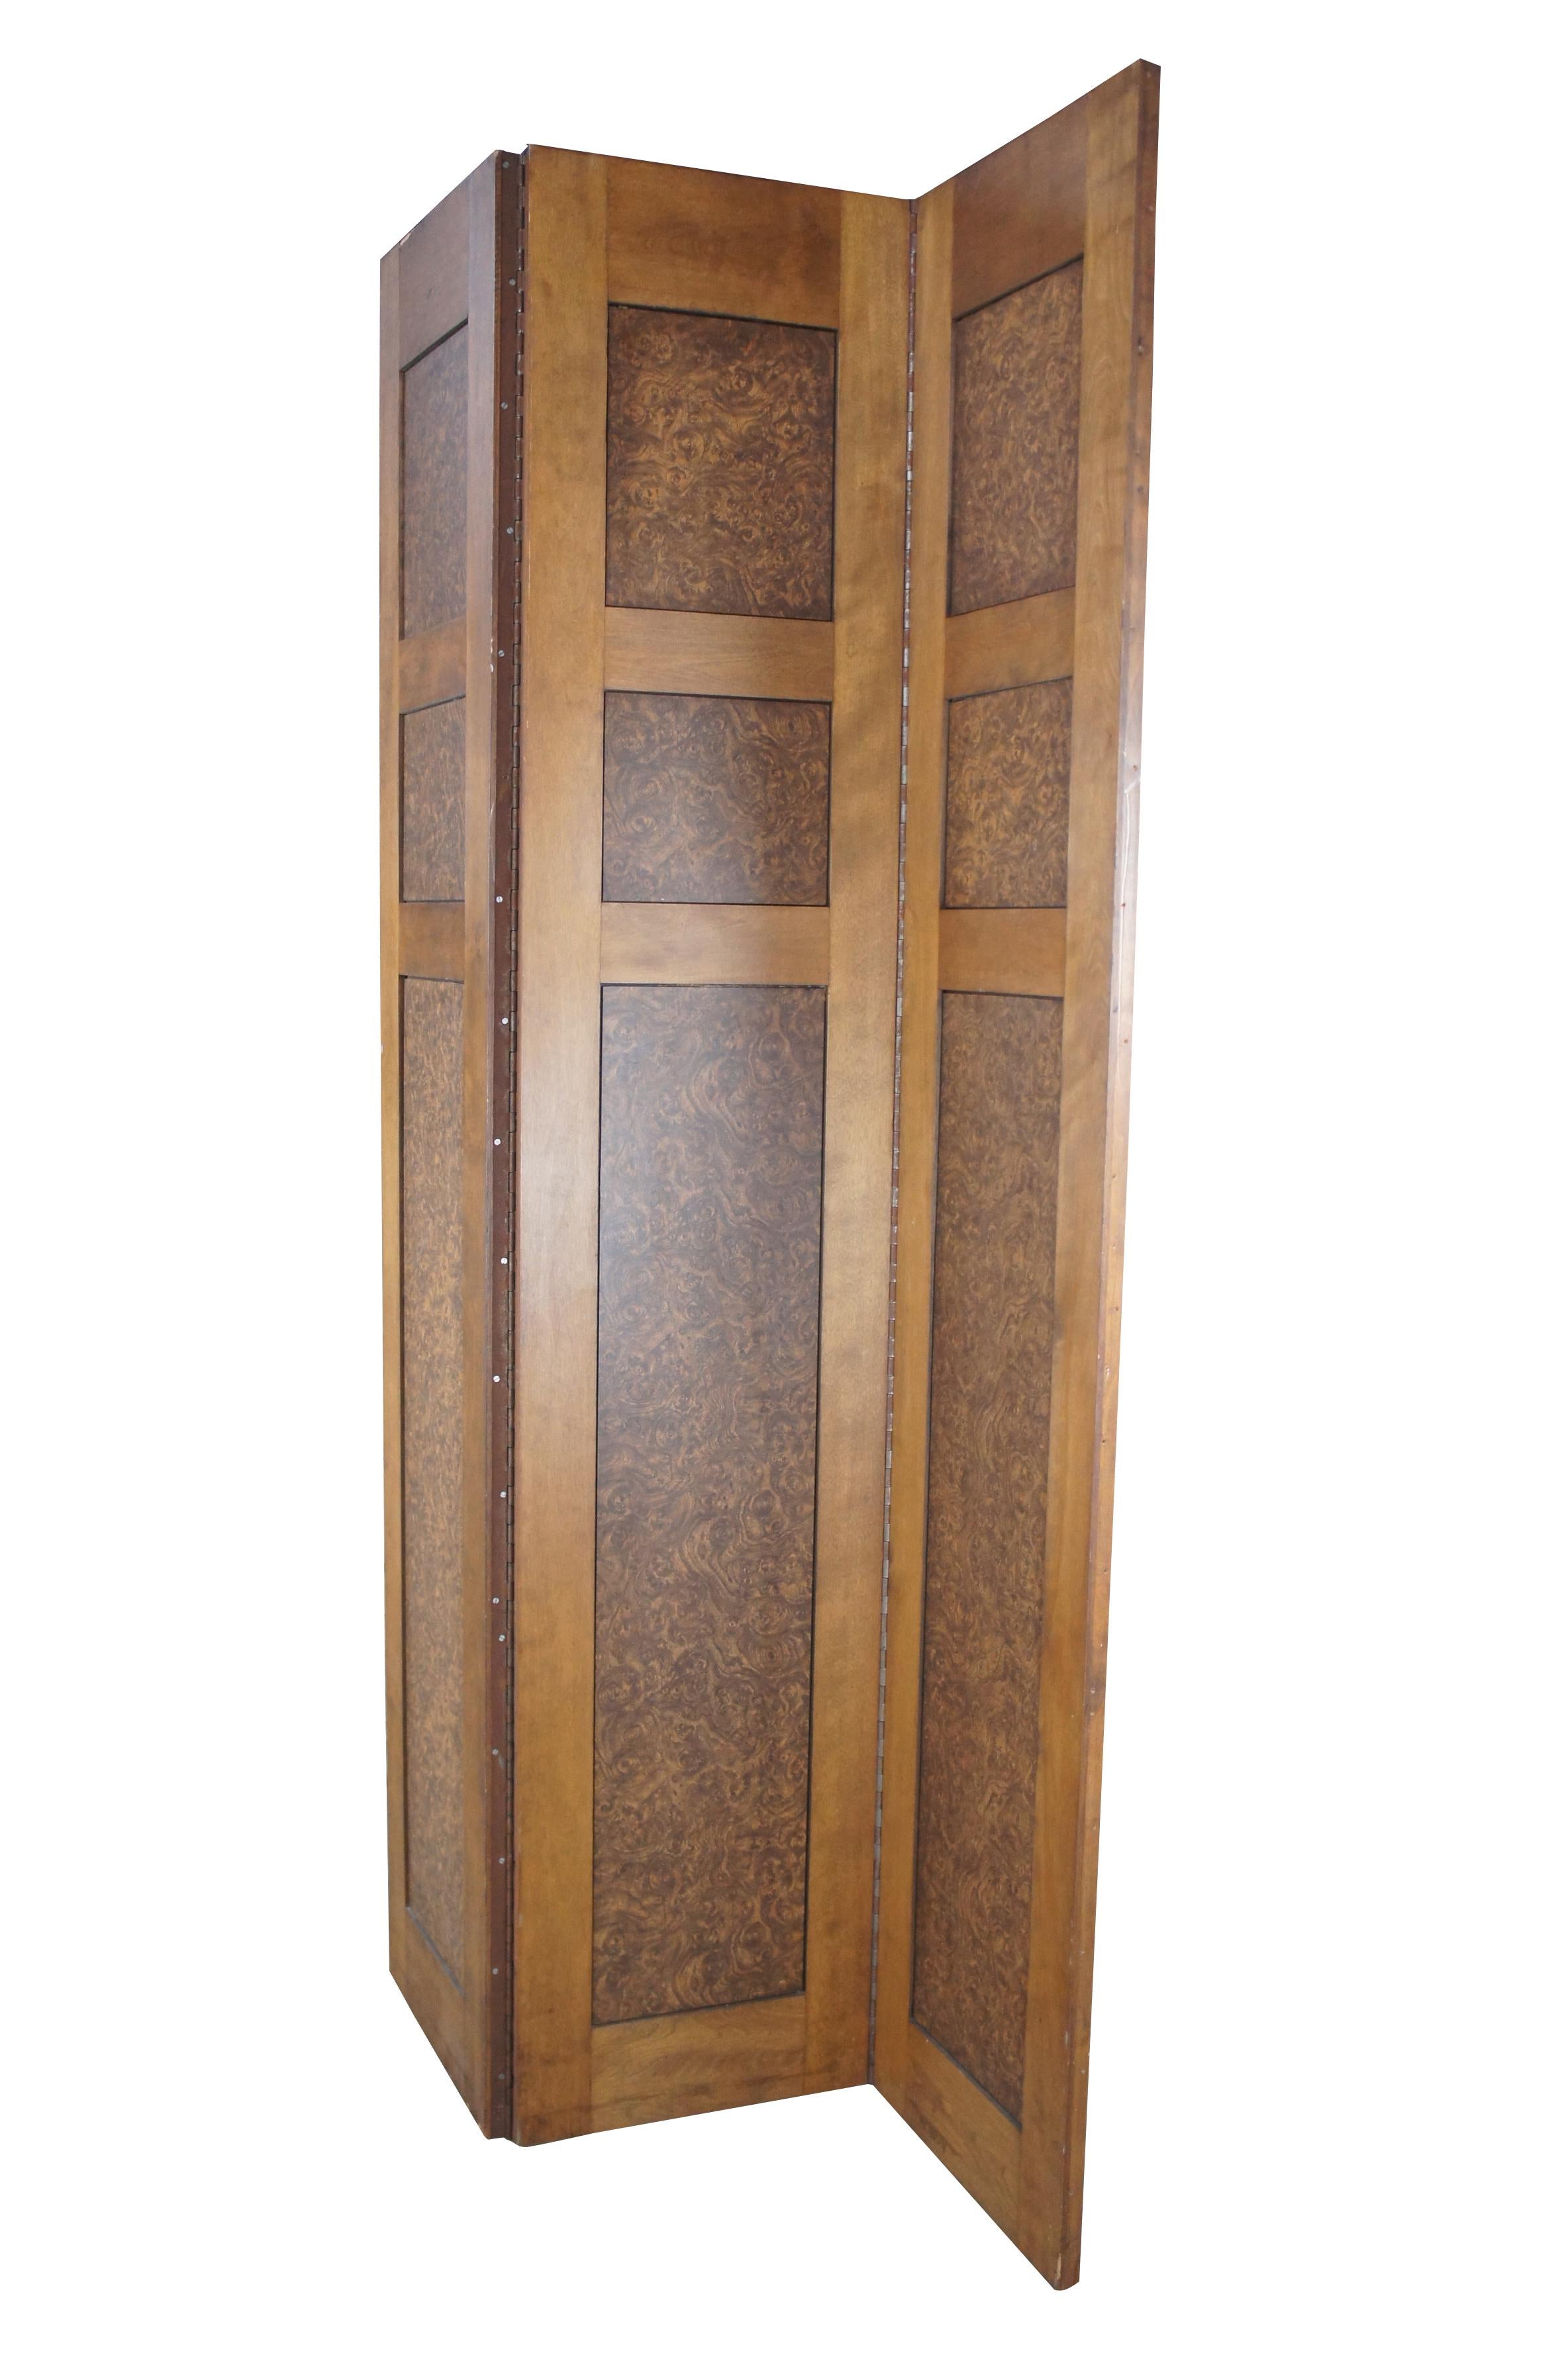 Monumental vintage 3 panel folding screen. Made from mahogany with inset mahogany burl panels. Connect by large iron hinges. A stout piece made to stand the test of time. Measure: 121